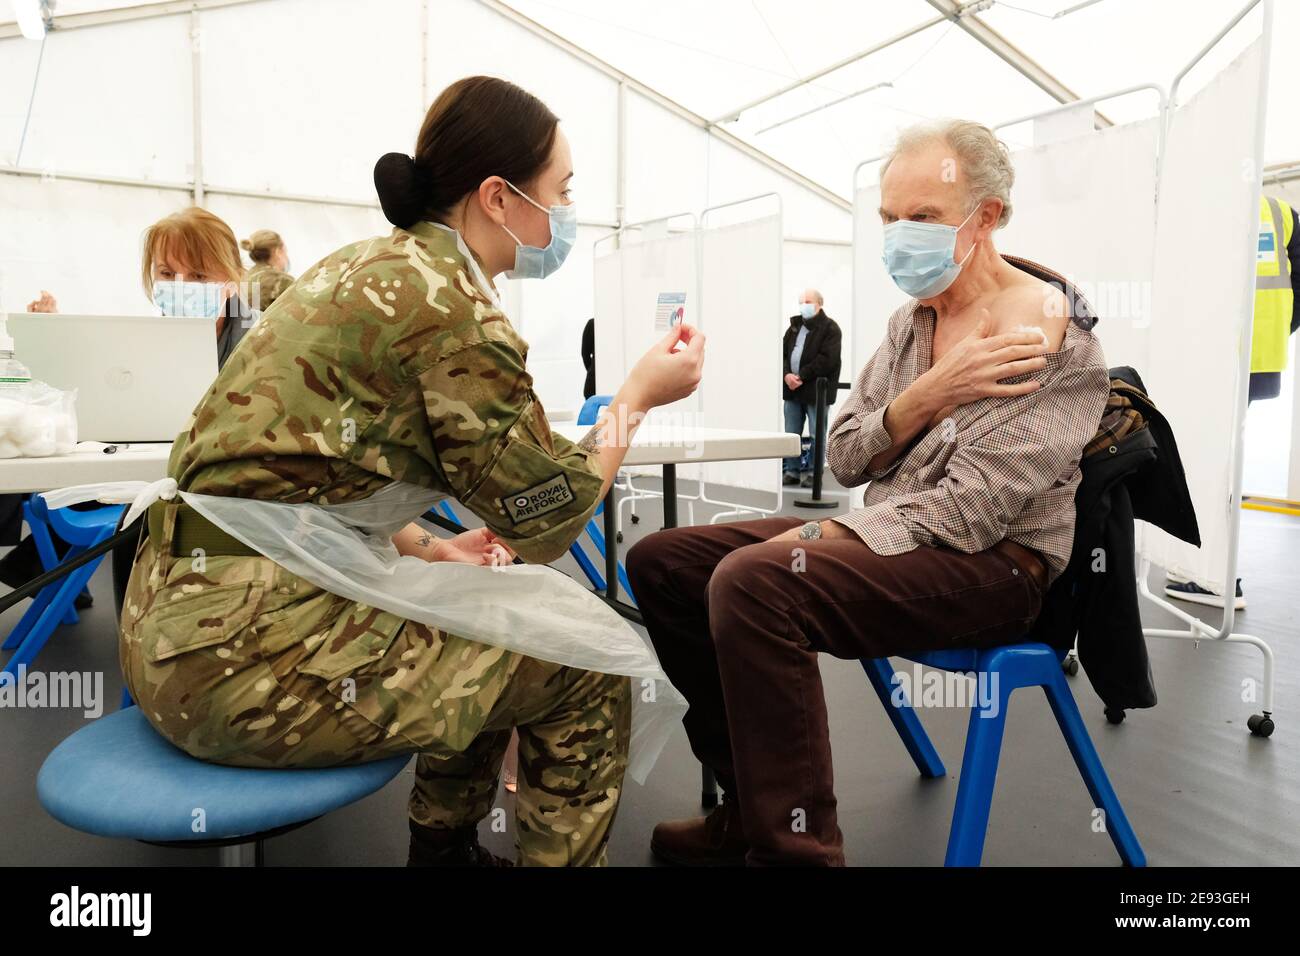 Ludlow, Shropshire, UK - Tuesday 2nd February 2021 - A new Covid 19 vaccination centre had opened today at Ludlow racecourse to provide coverage for the Shropshire, Telford & Wrekin area. NHS, local council and members of the Royal Air Force have been administering the AstraZeneca vaccine on local residents. Photo Steven May / Alamy Live News Stock Photo